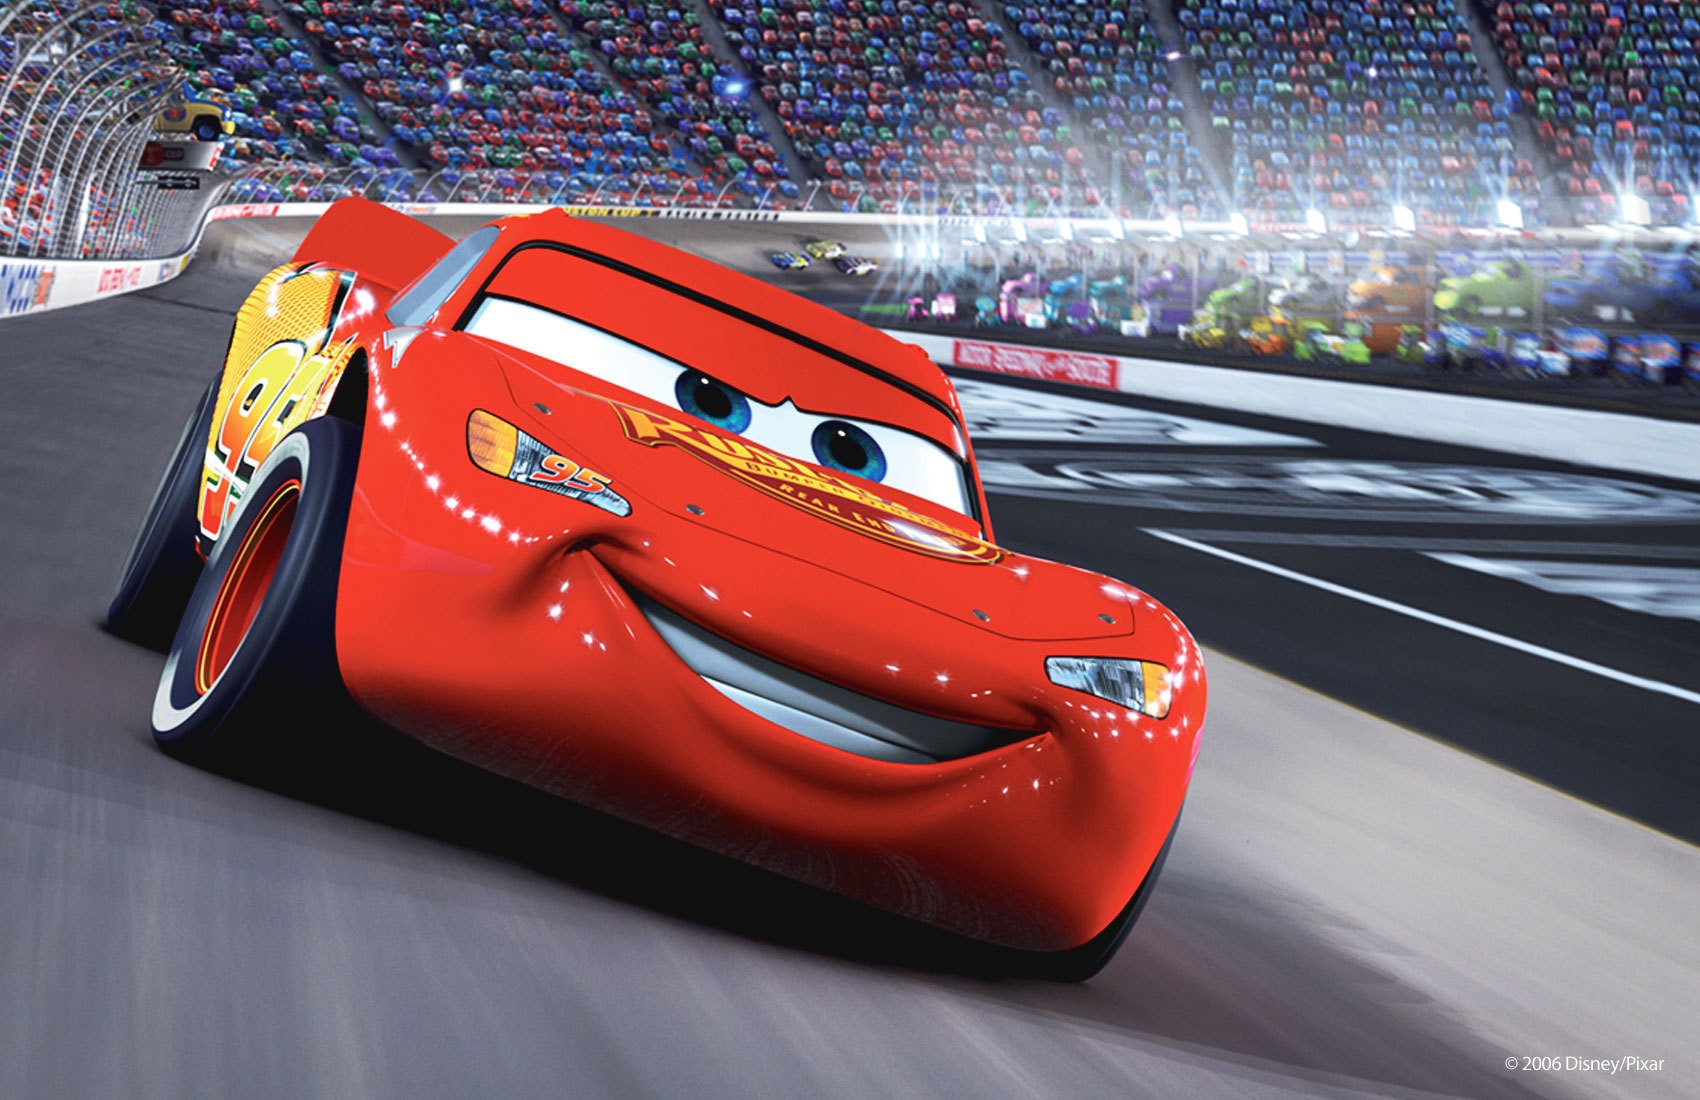 New 'Cars' attraction will open at Disney's Hollywood Studios this March | Blogs